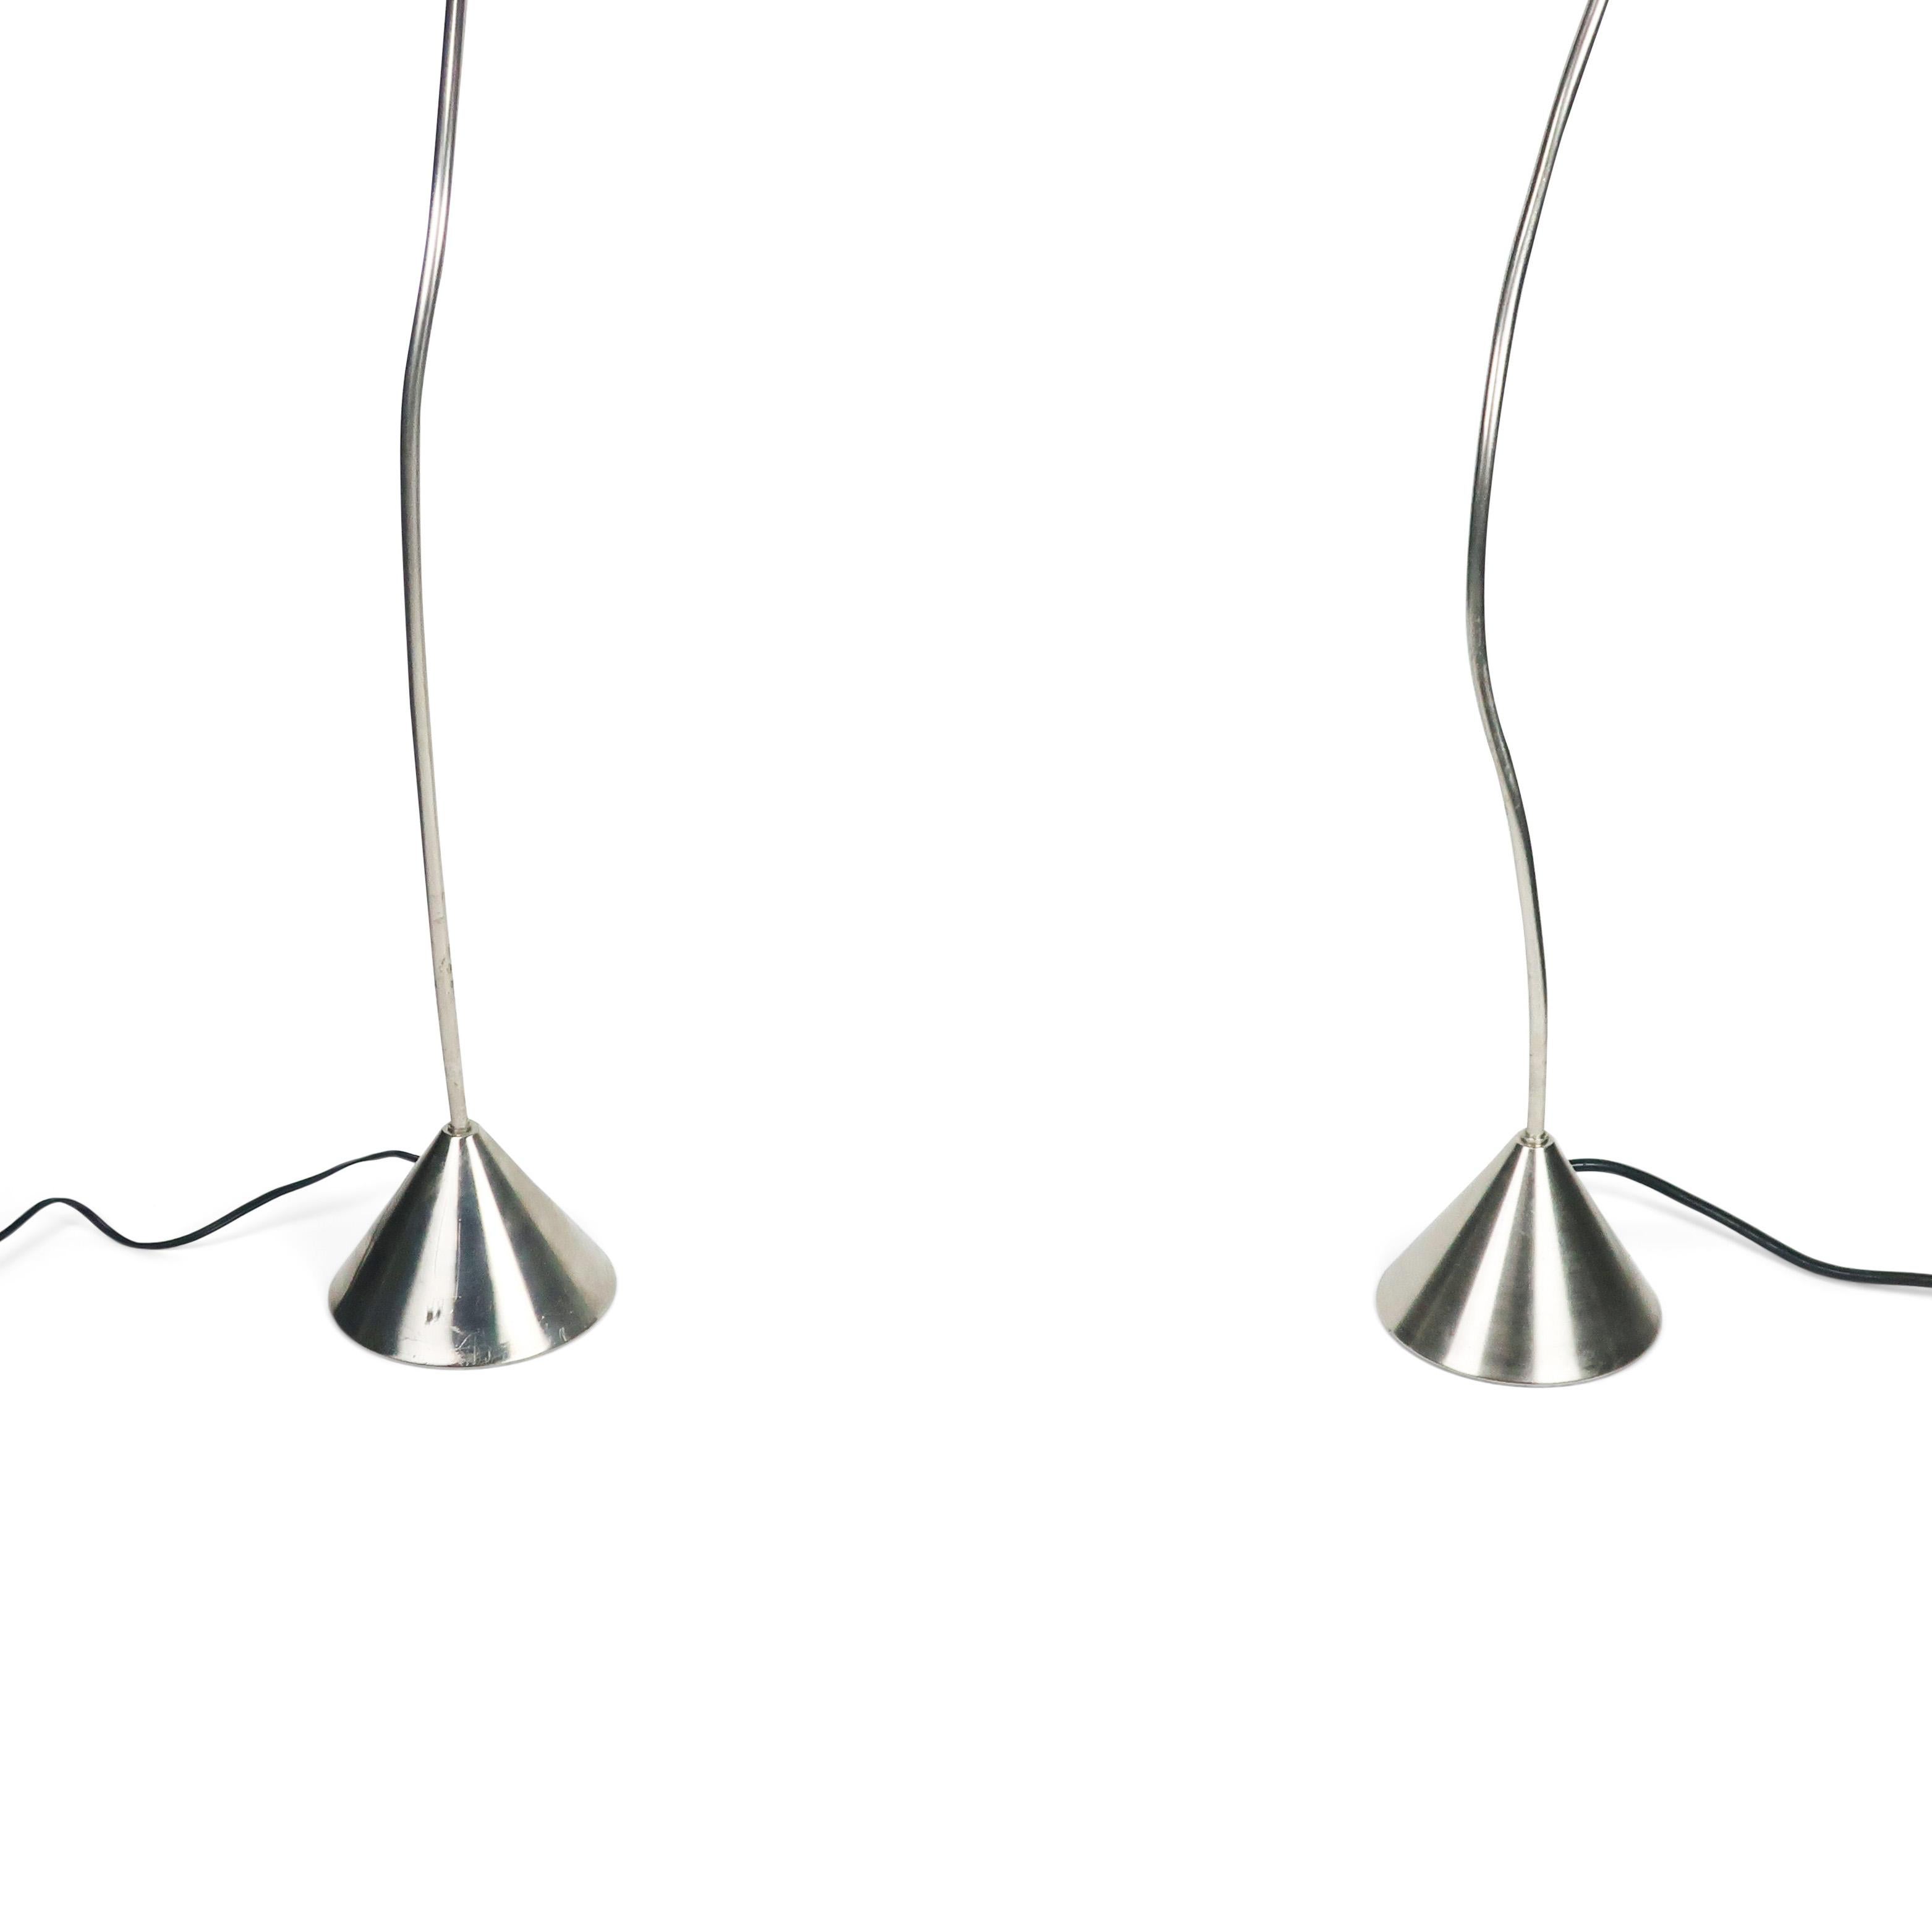 Pair of Nickel Papiro Floor Lamp by Sergio Calatroni for Pallucco Italia In Good Condition For Sale In Brooklyn, NY